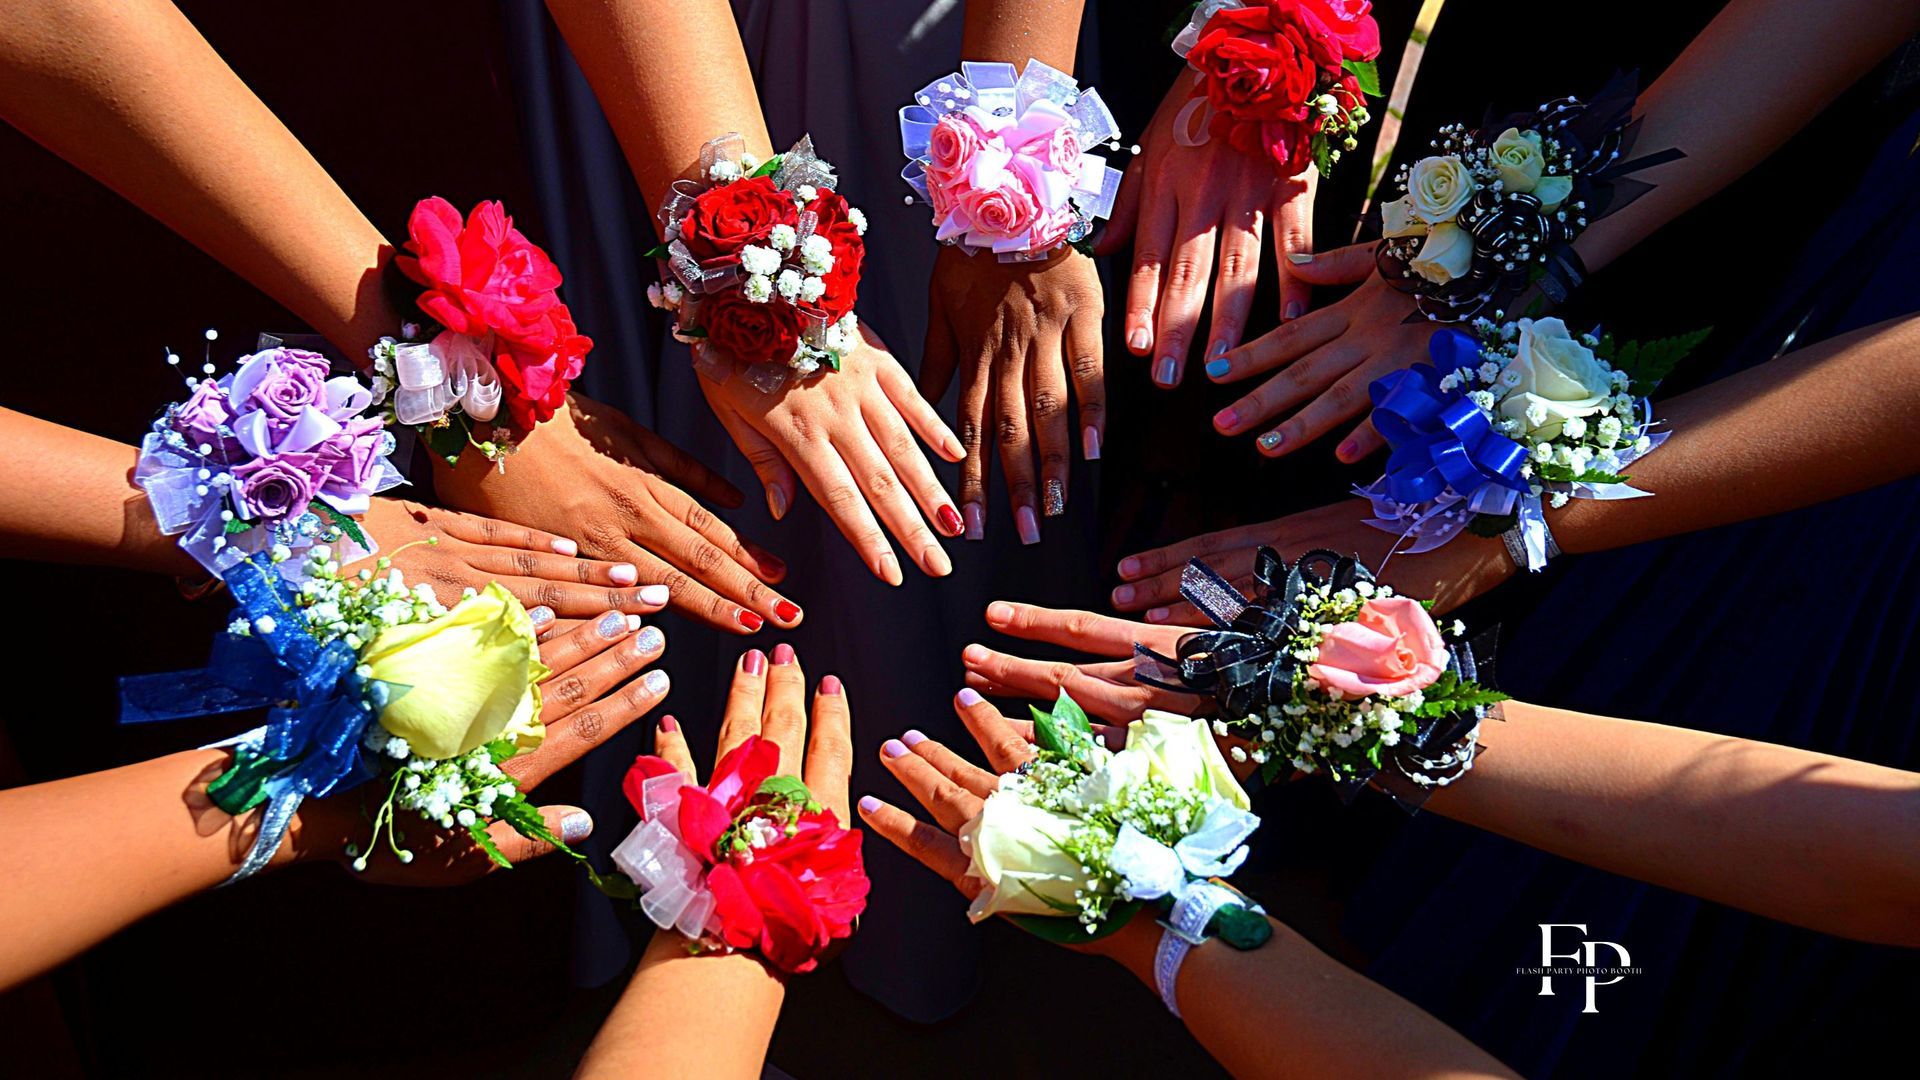 Sugar Land prom-goers form a circle with their hands with delicate corsages